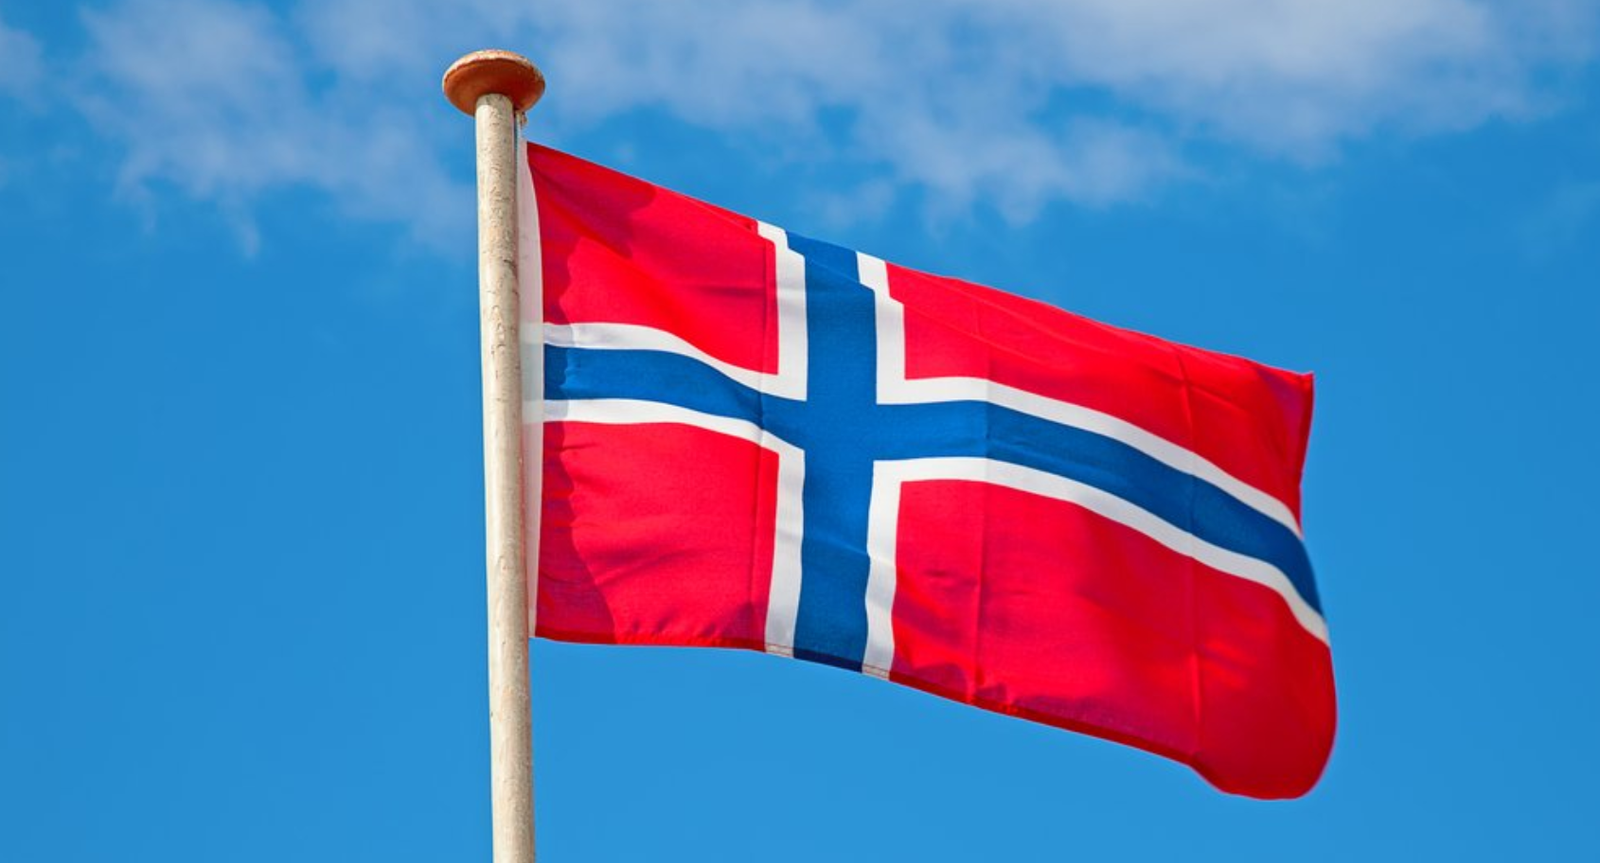 Norway Now Recommends Boosters Mostly to Those Aged Over 65